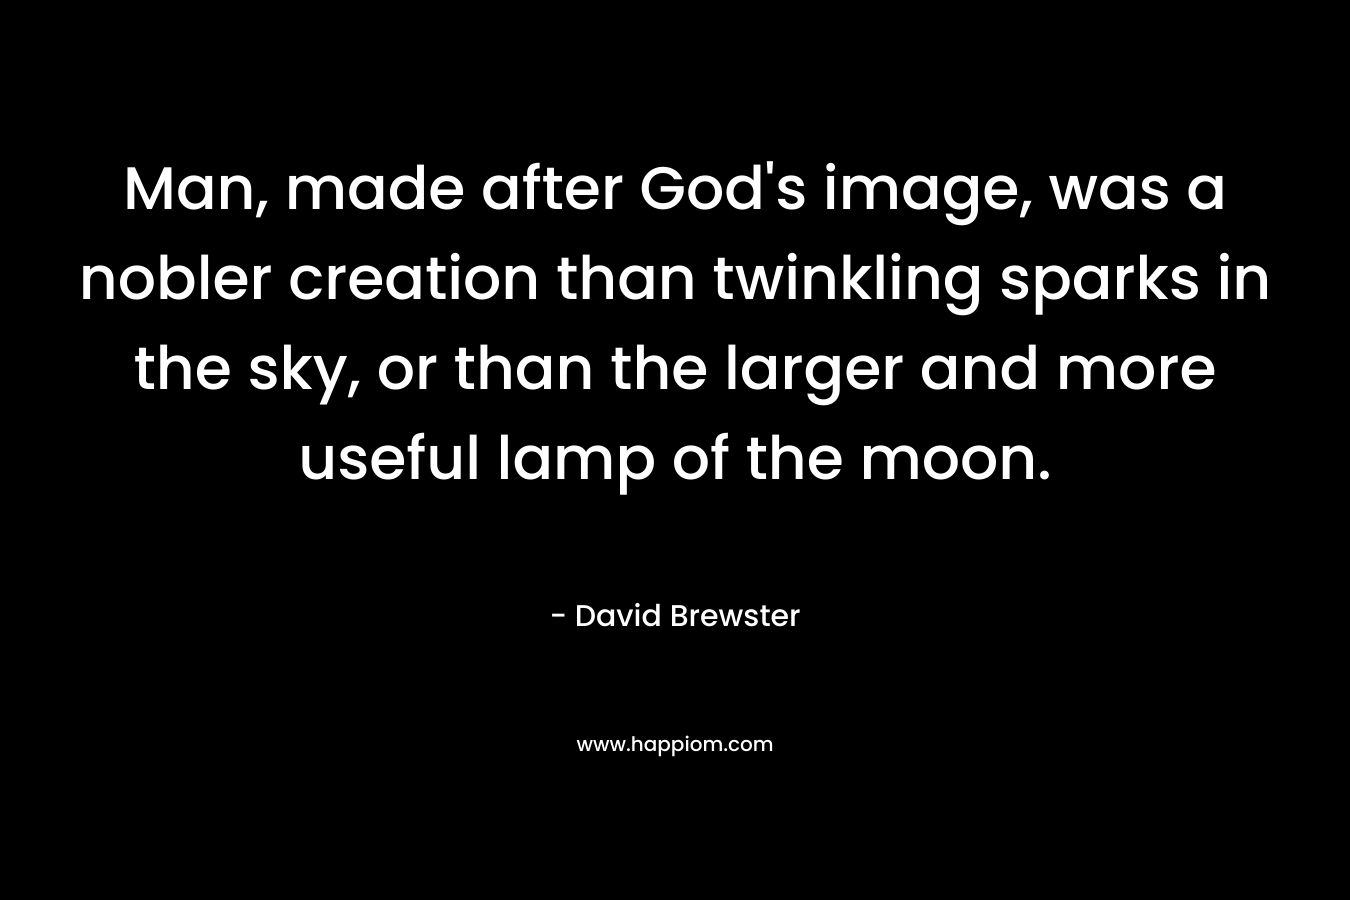 Man, made after God’s image, was a nobler creation than twinkling sparks in the sky, or than the larger and more useful lamp of the moon. – David Brewster